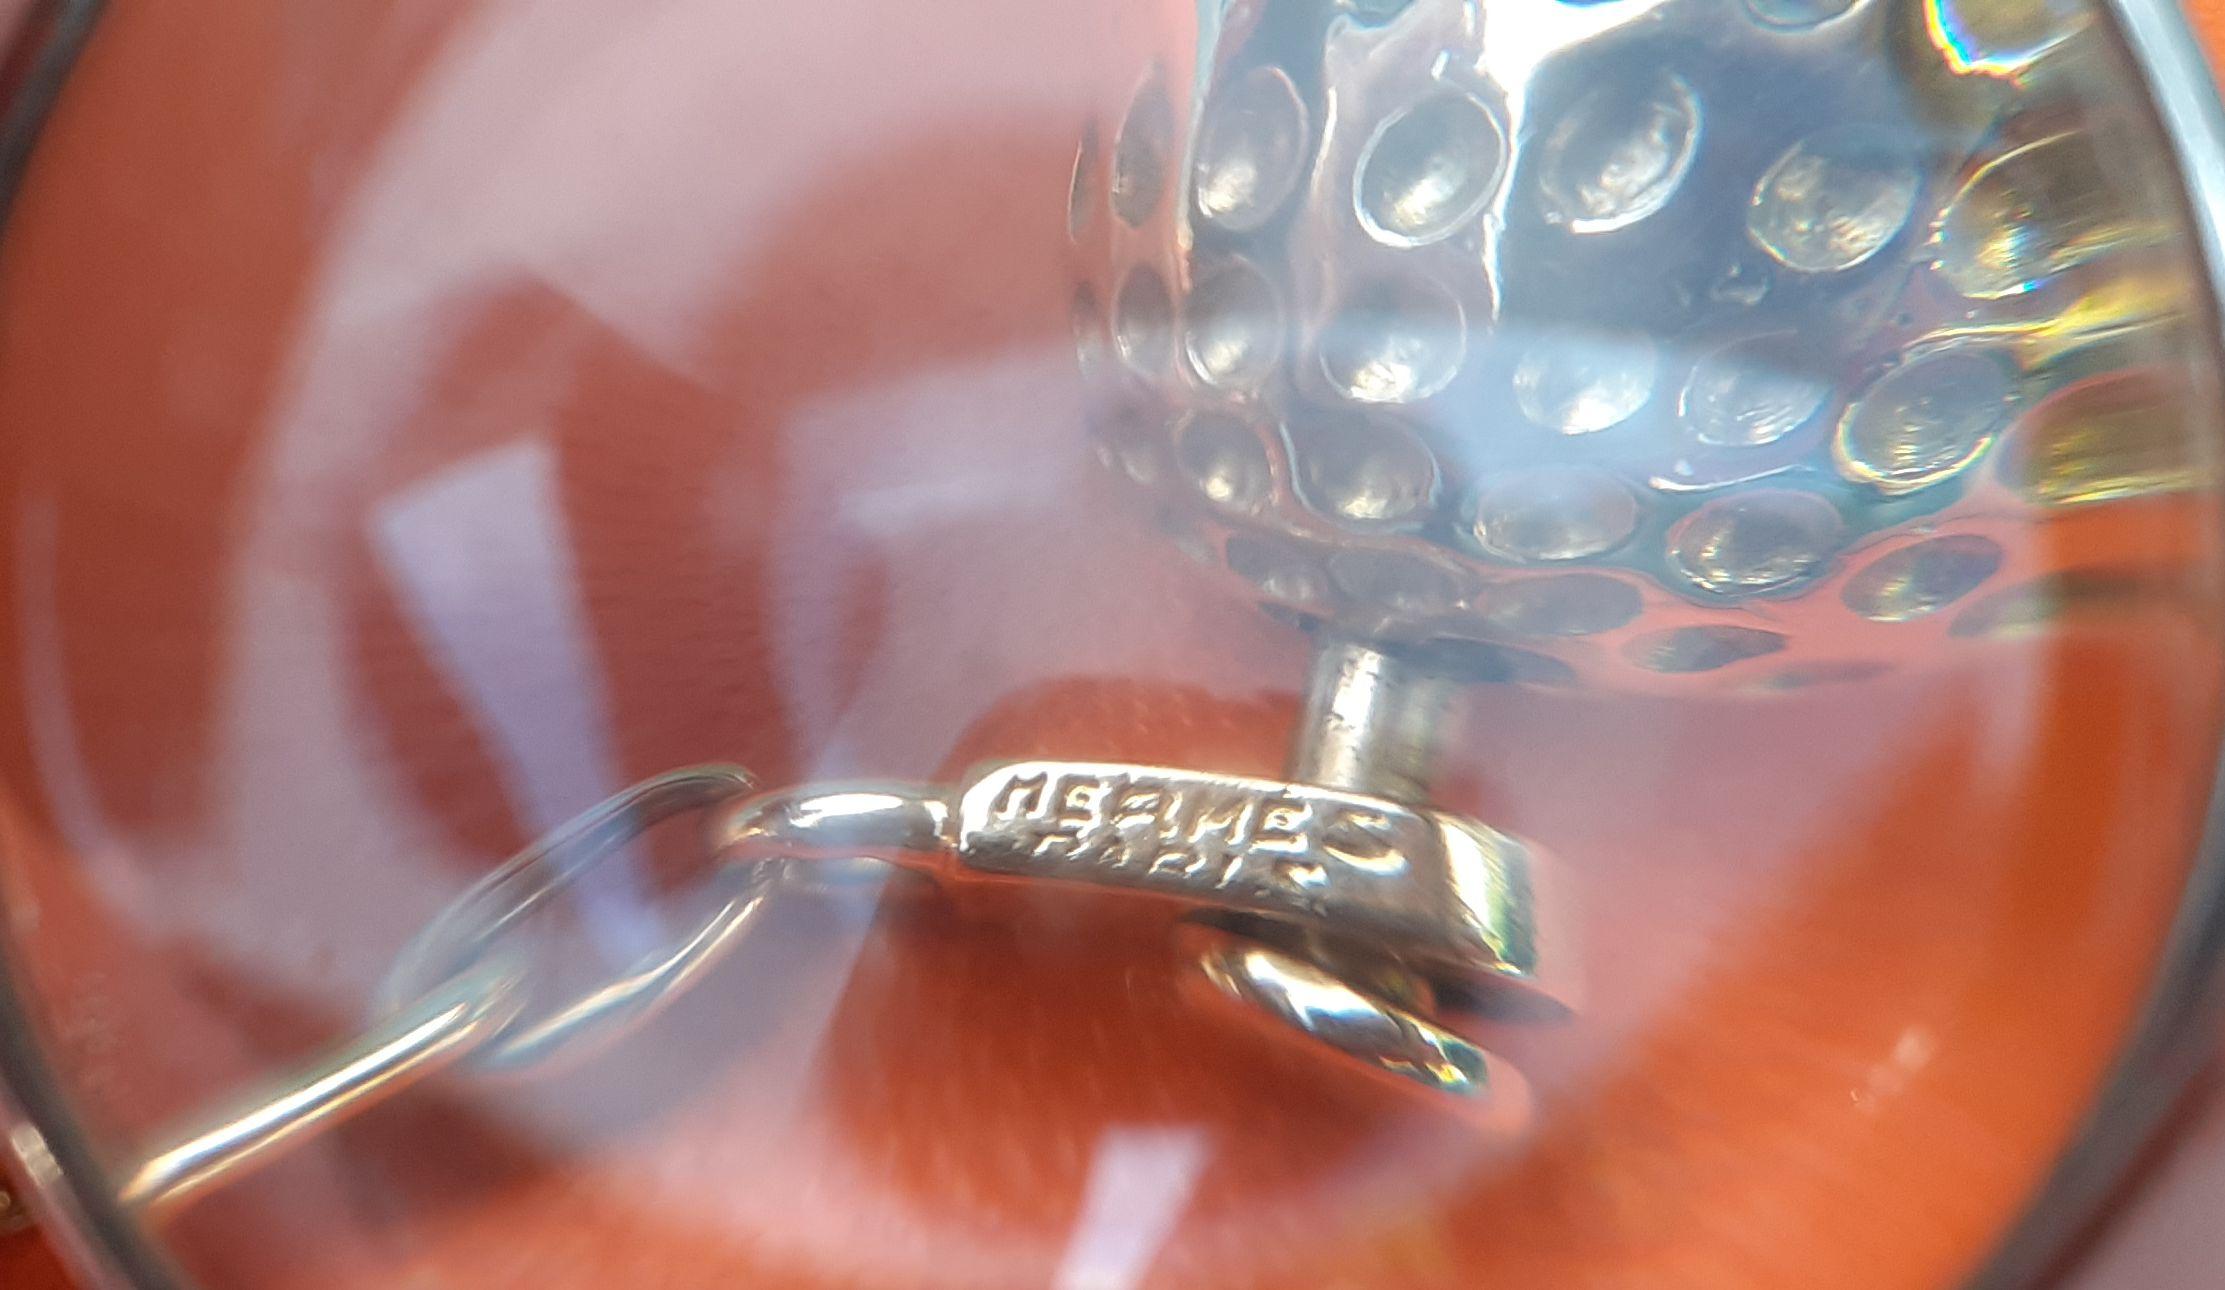 Exceptional Hermès Key Holder Keychain Golf Ball Shape in Yellow Gold RARE For Sale 1